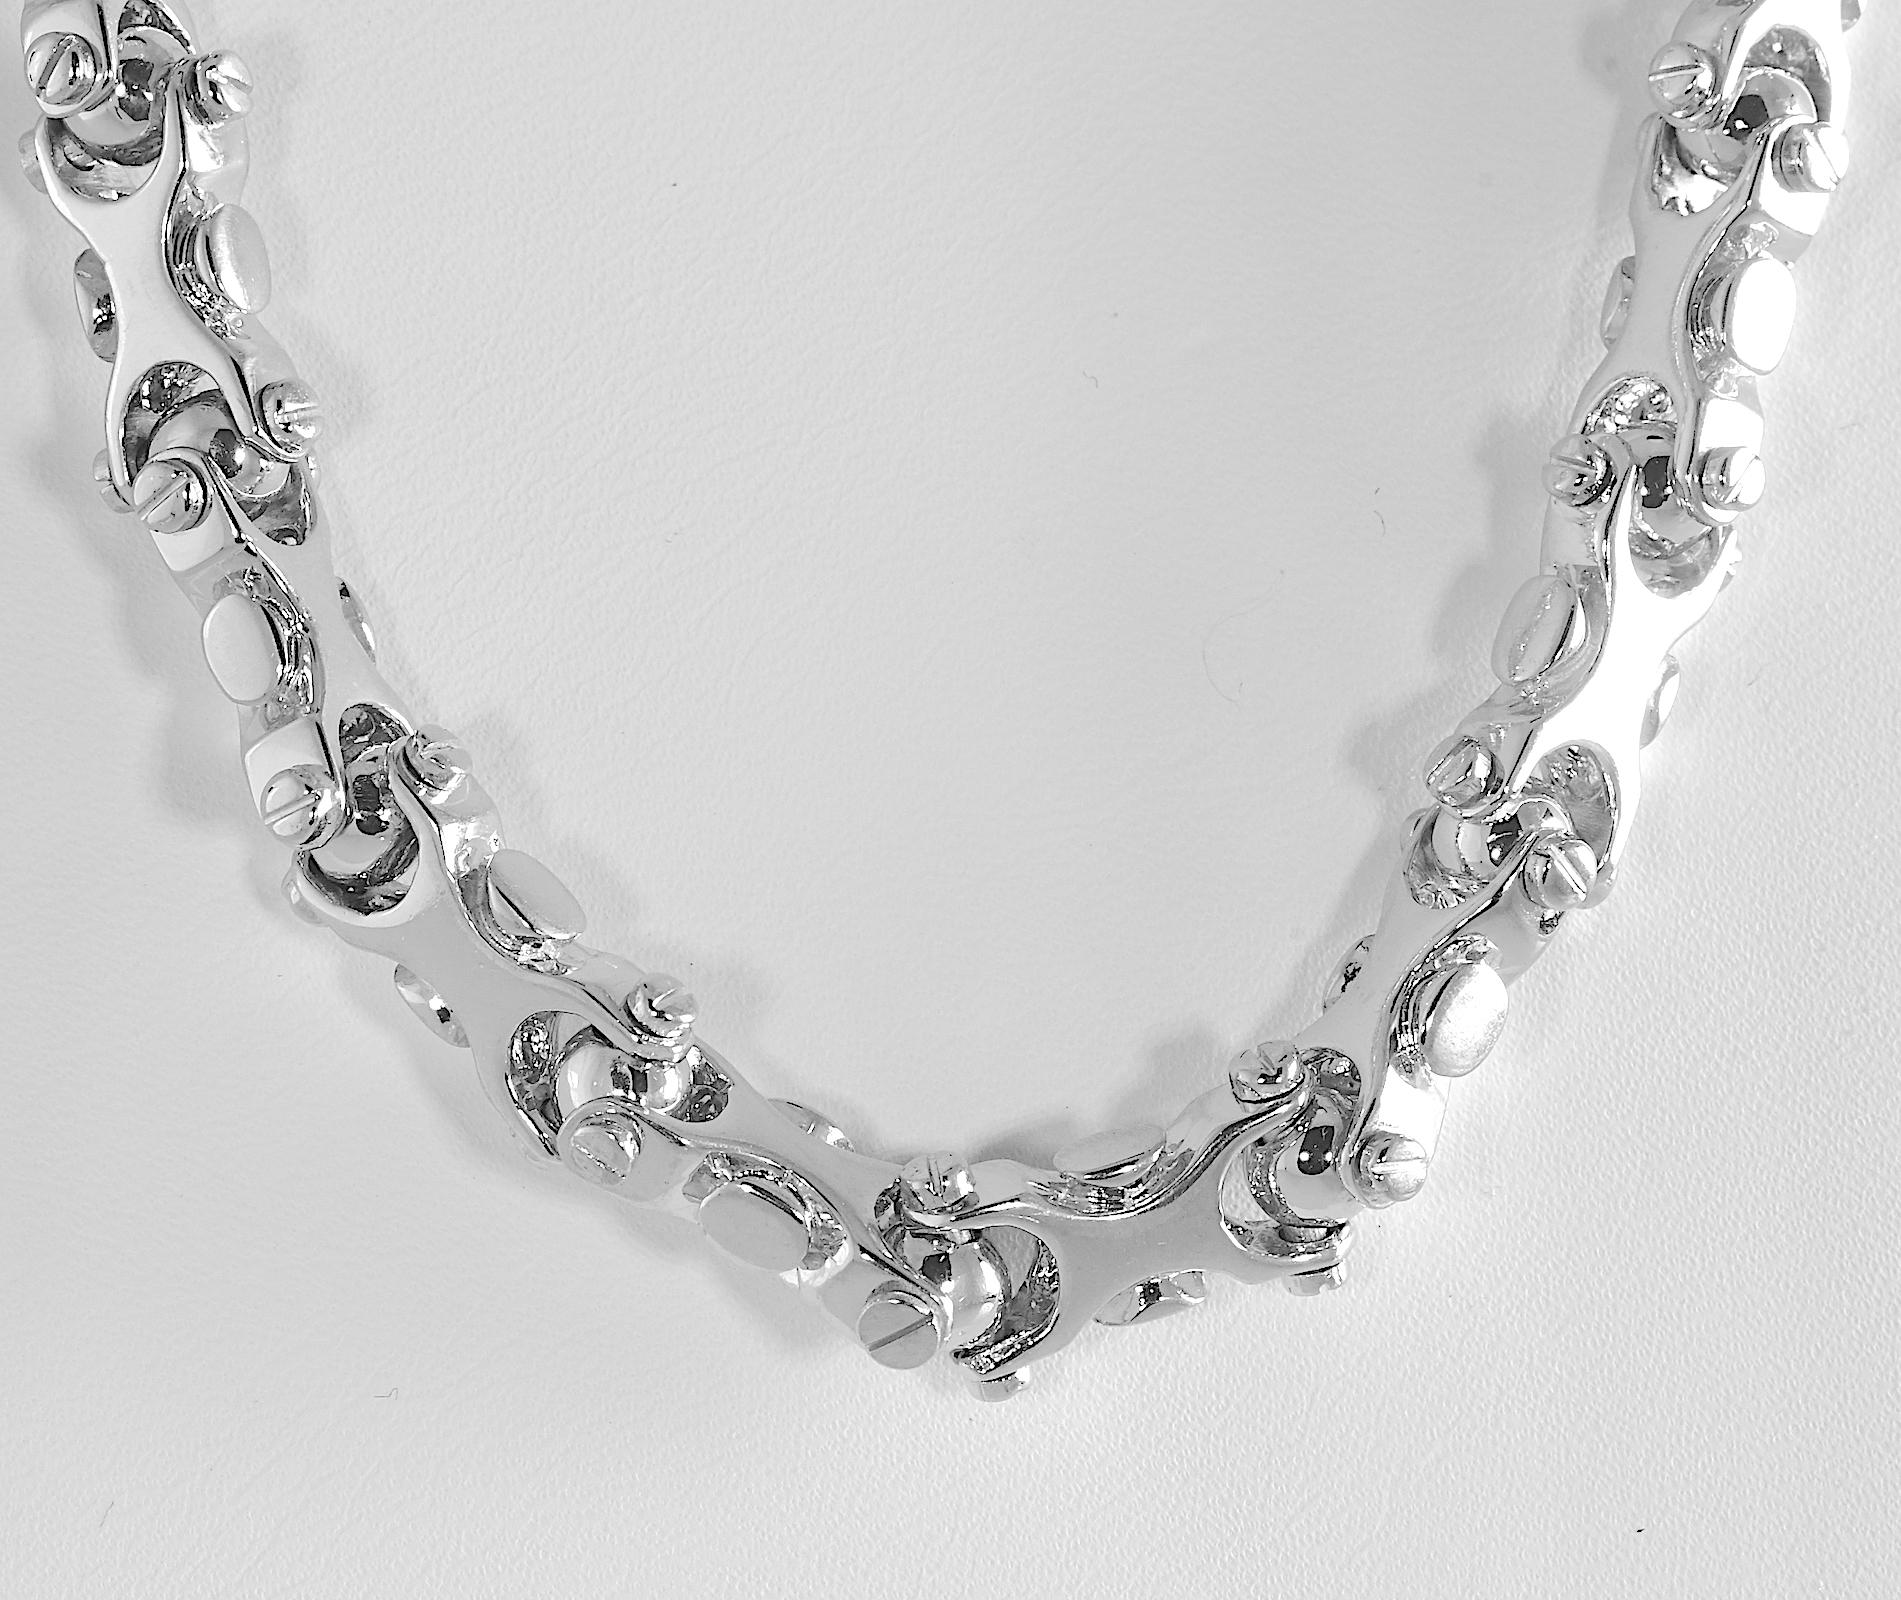 Unique 14 karat white gold geometrical links with screw hinges. The length of the necklace is 20 inches. The width is 3/8 inch. The weight is 143.0 grams. The closure is a swivel lobster claw.  Tested and guaranteed 14 karat.   

340029-1